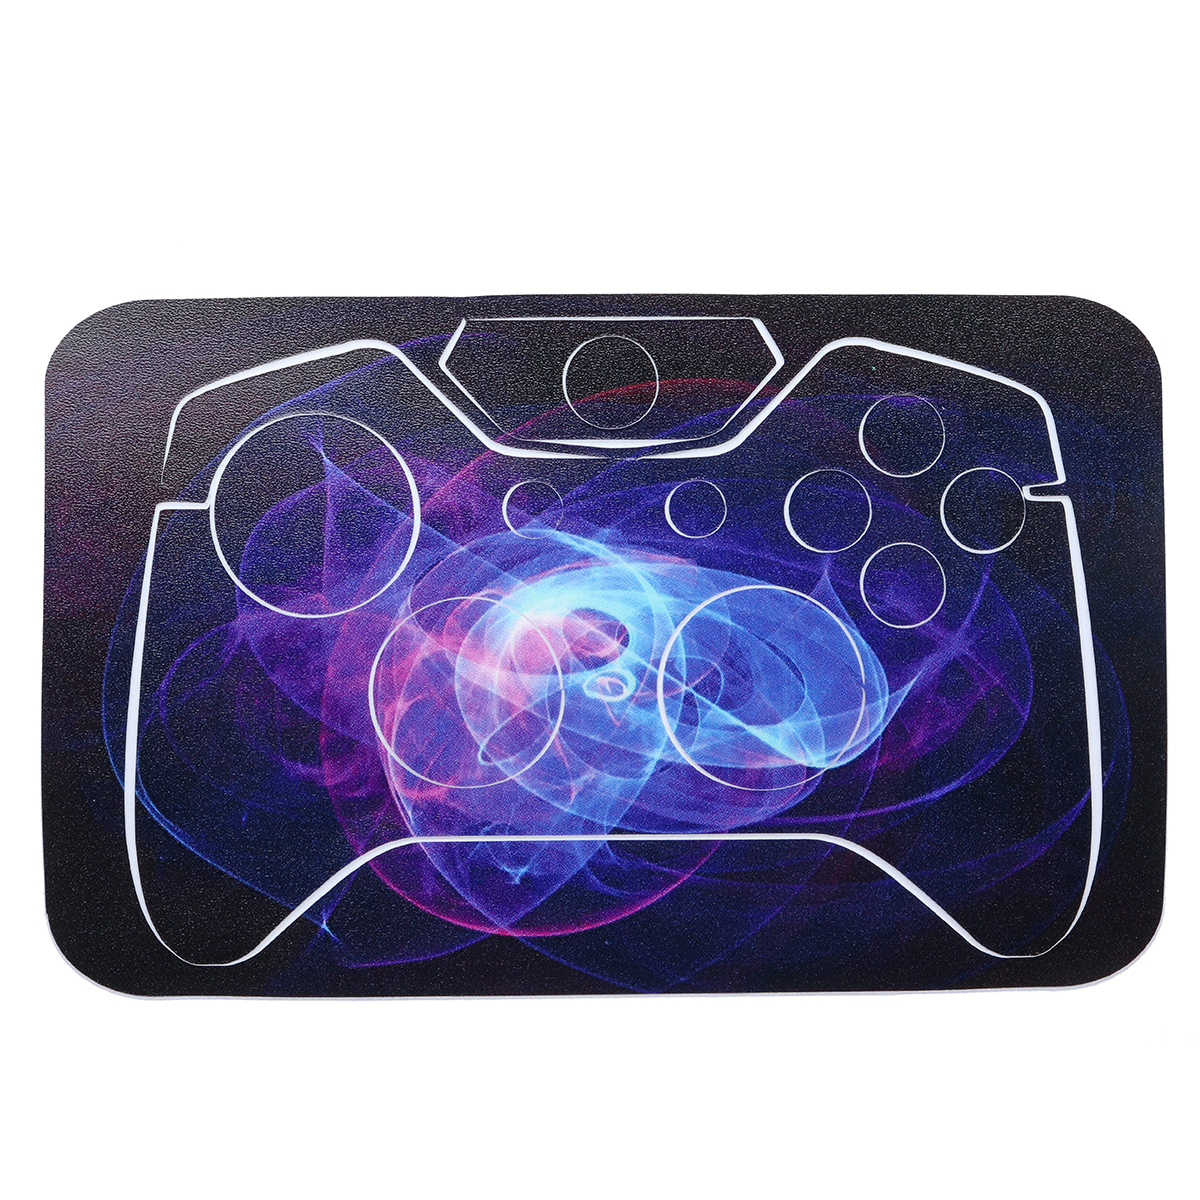 Purple Protective Vinyl Decal Skin Stickers Wrap Cover For Xbox One Game Console Game Controller Kinect 18